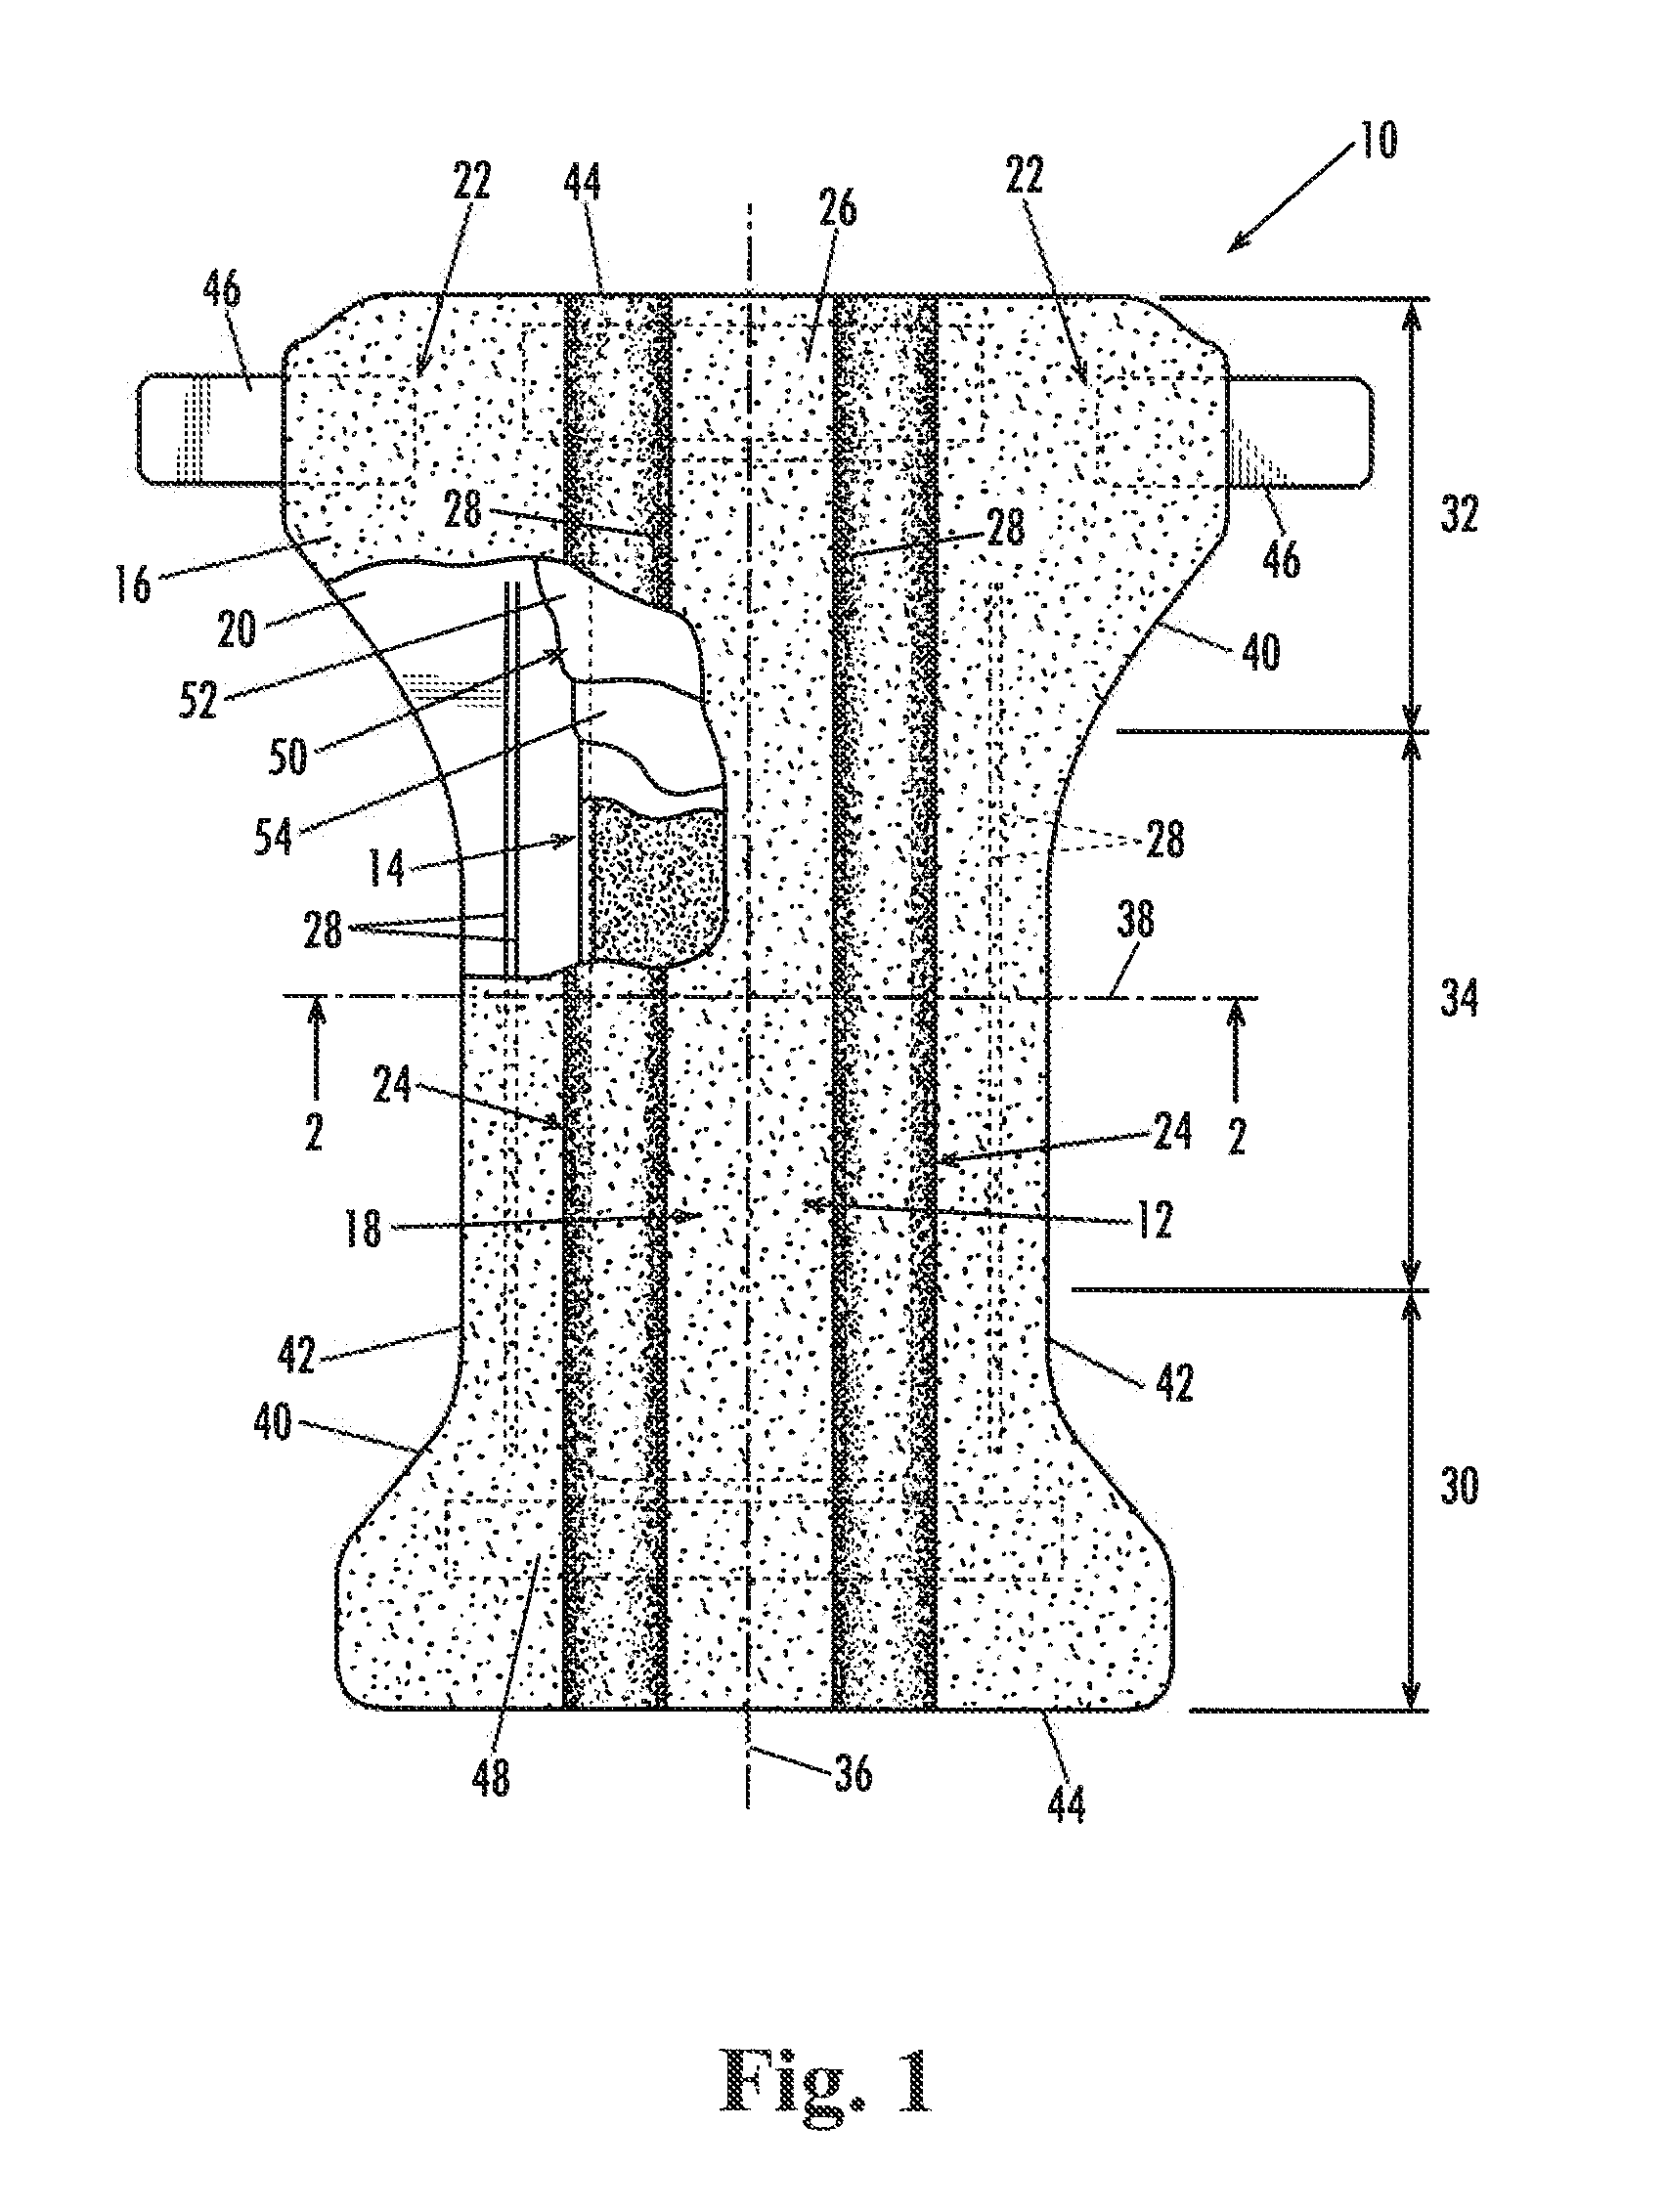 Disposable Absorbent Article With Absorbent Particulate Polymer Material Distributed For Improved Isolation Of Body Exudates